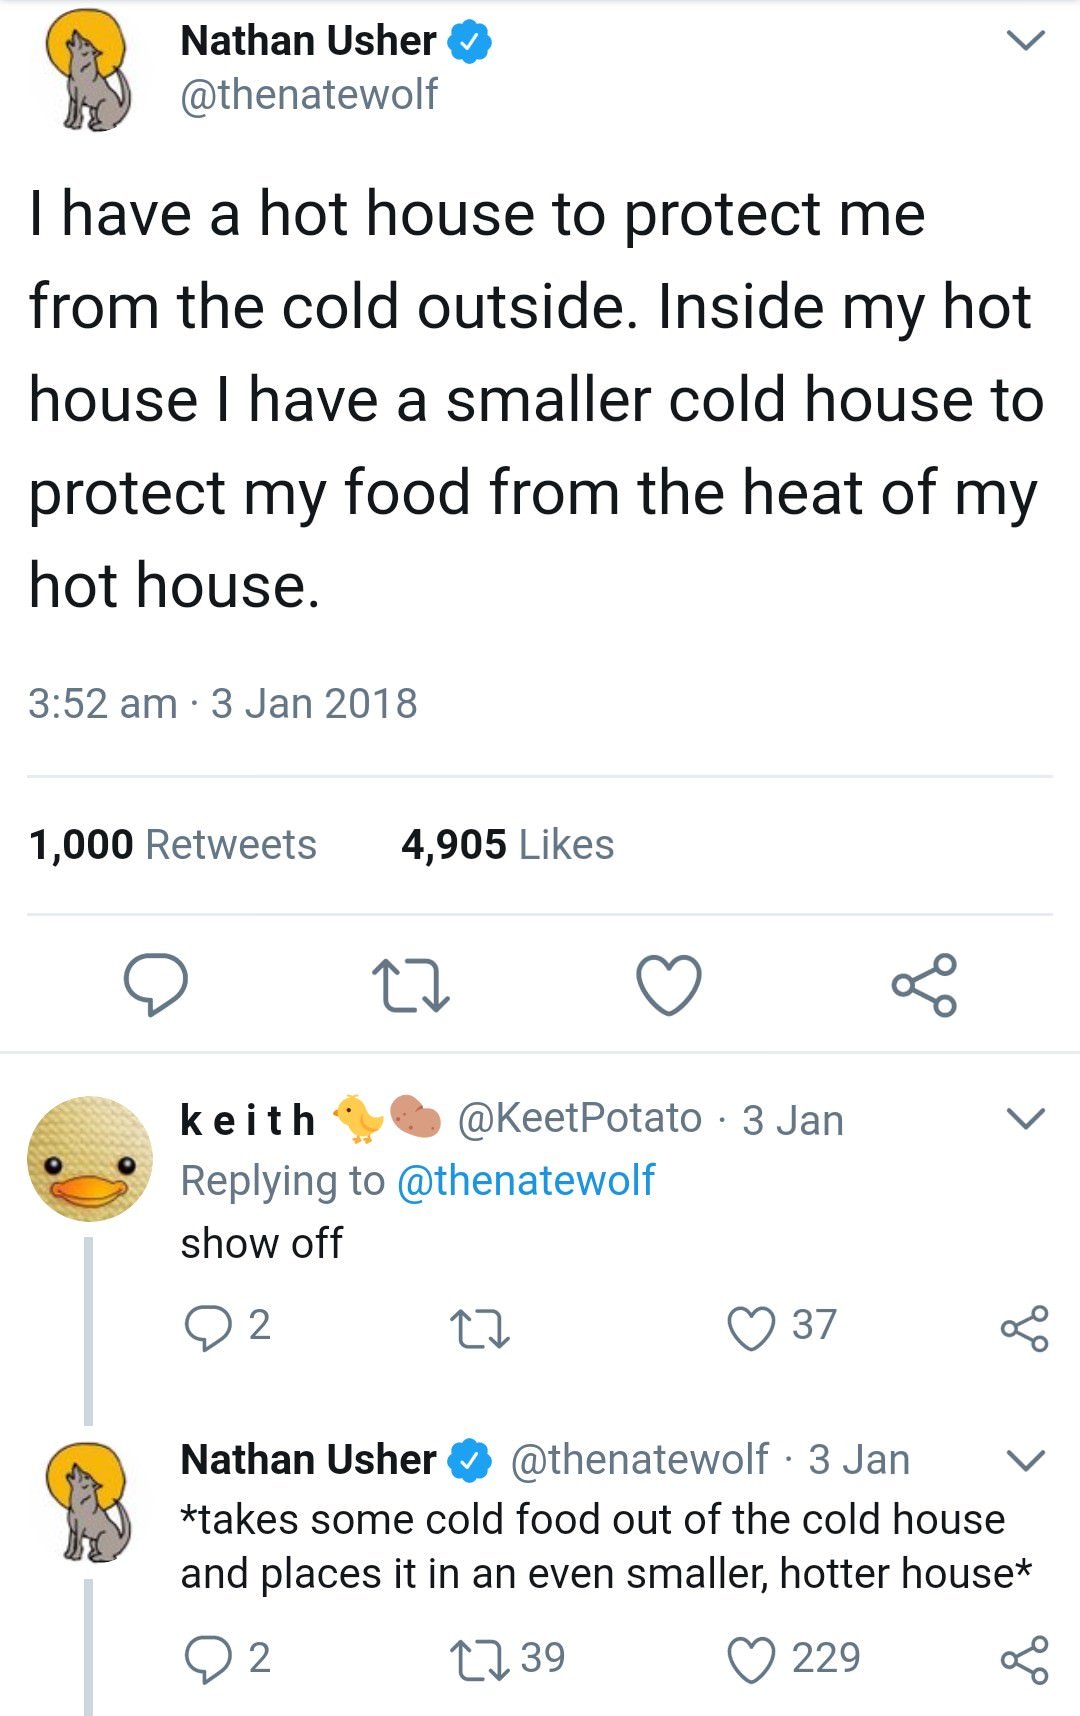 hot house in my cold house - Nathan Usher Thave a hot house to protect me from the cold outside. Inside my hot house I have a smaller cold house to protect my food from the heat of my hot house. 1,000 4,905 22 keith Potato 3 Jan show off 02 22 37 Nathan U